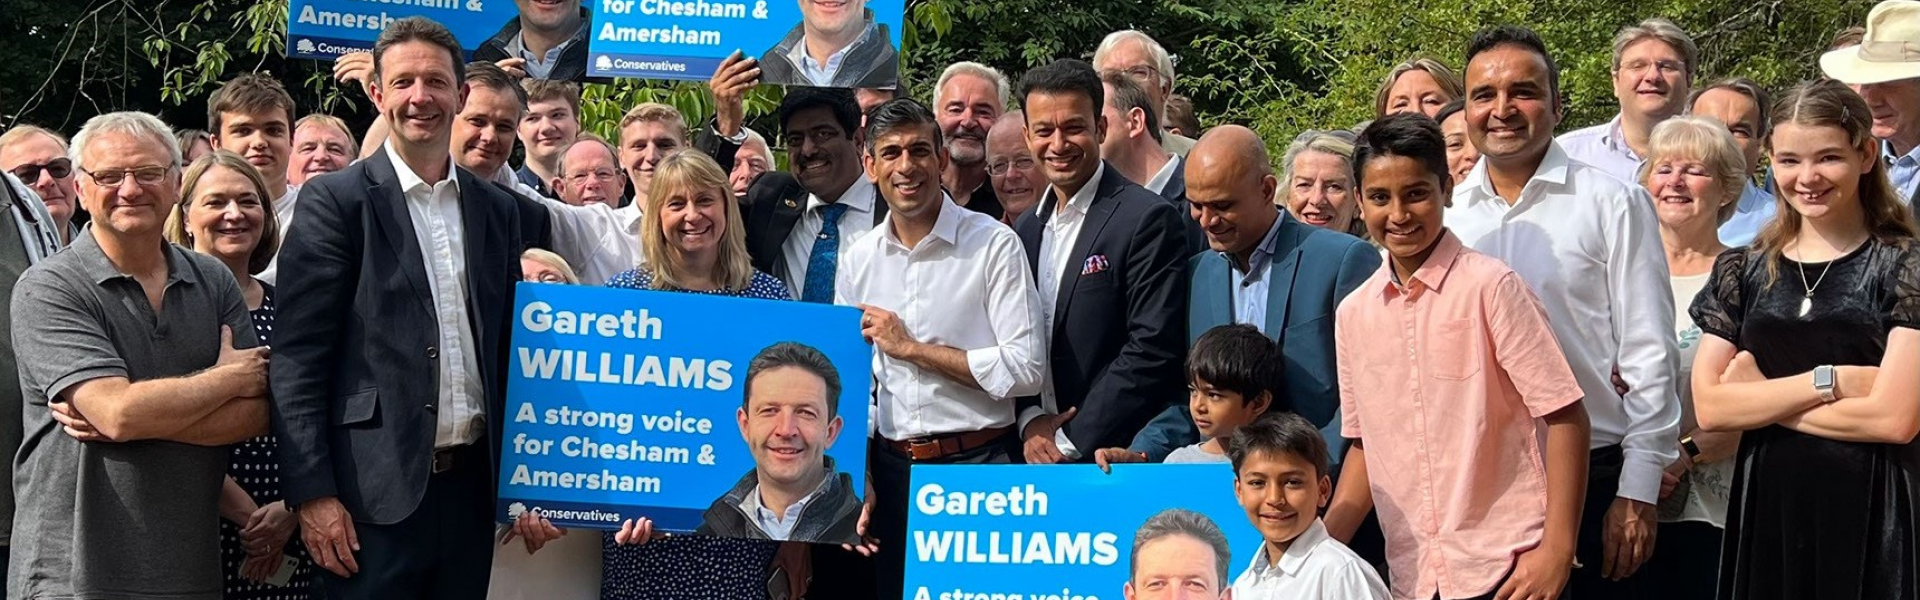 Gareth Williams with the Rishi Sunak MP, Prime Minister and Leader of the Conservative Party